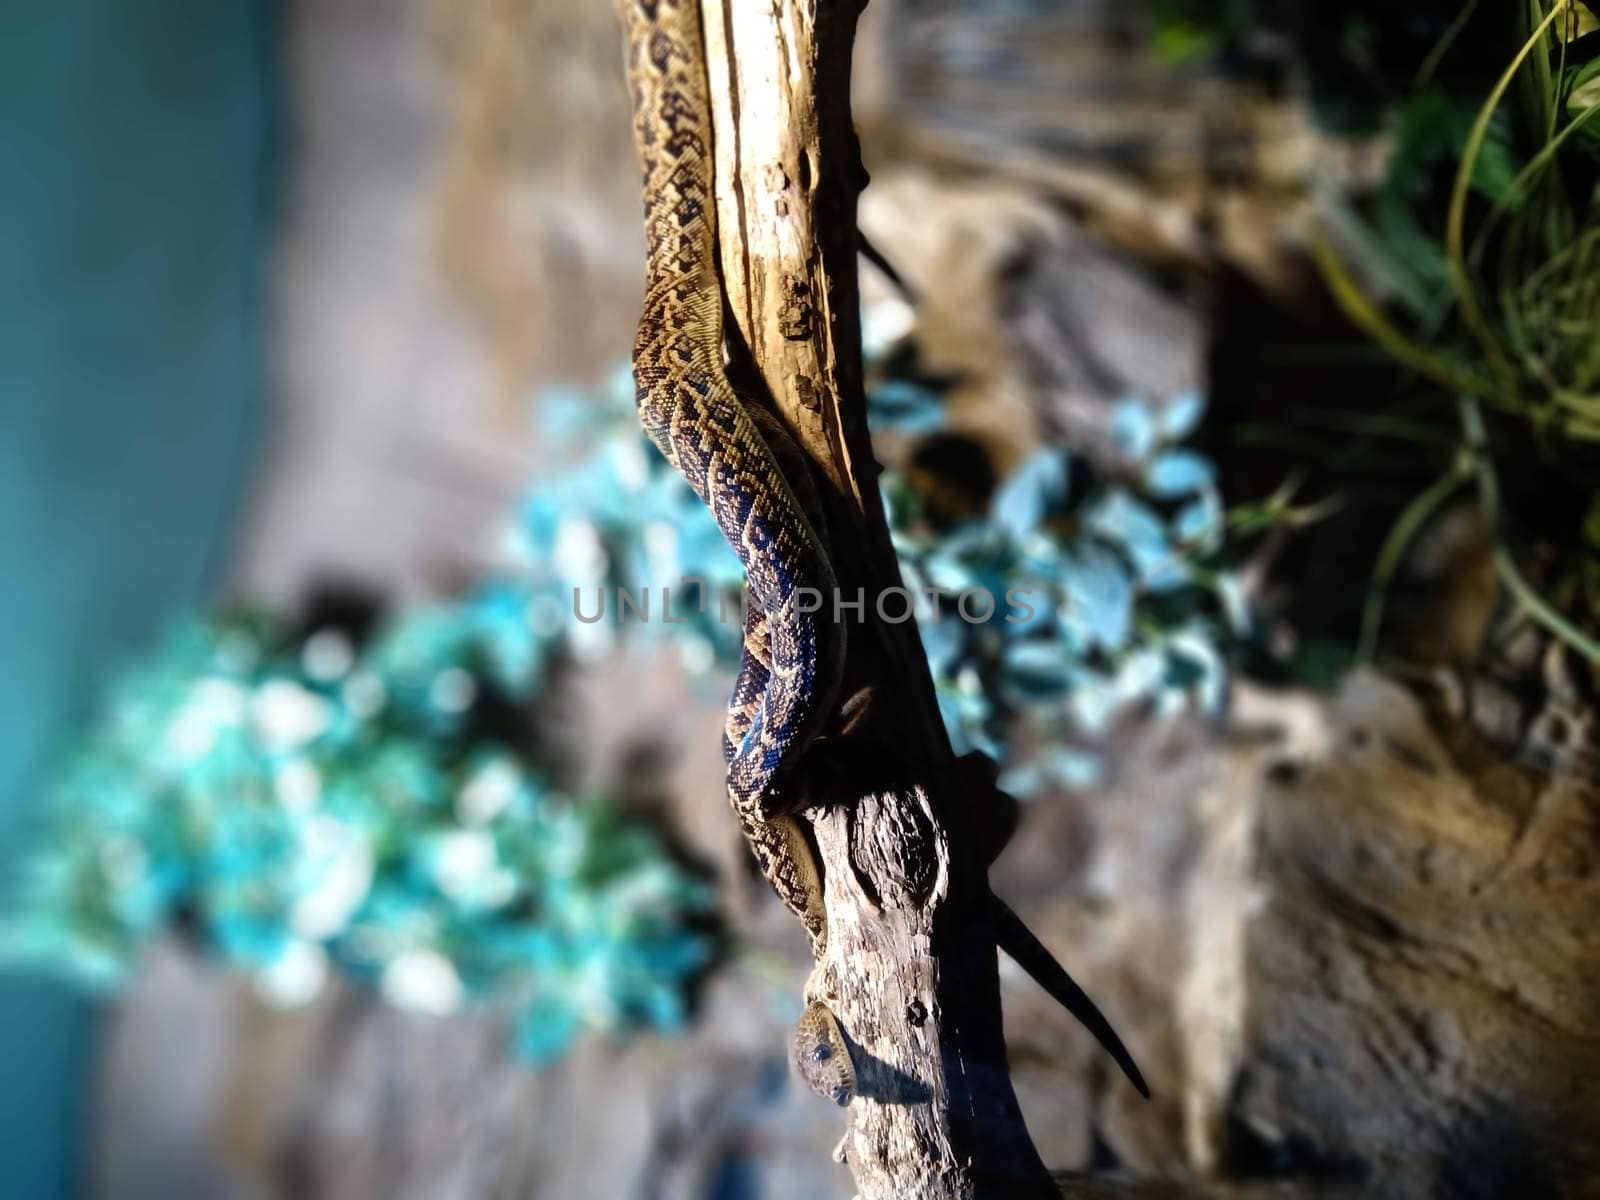 Brown snake at the zoo. High quality photo